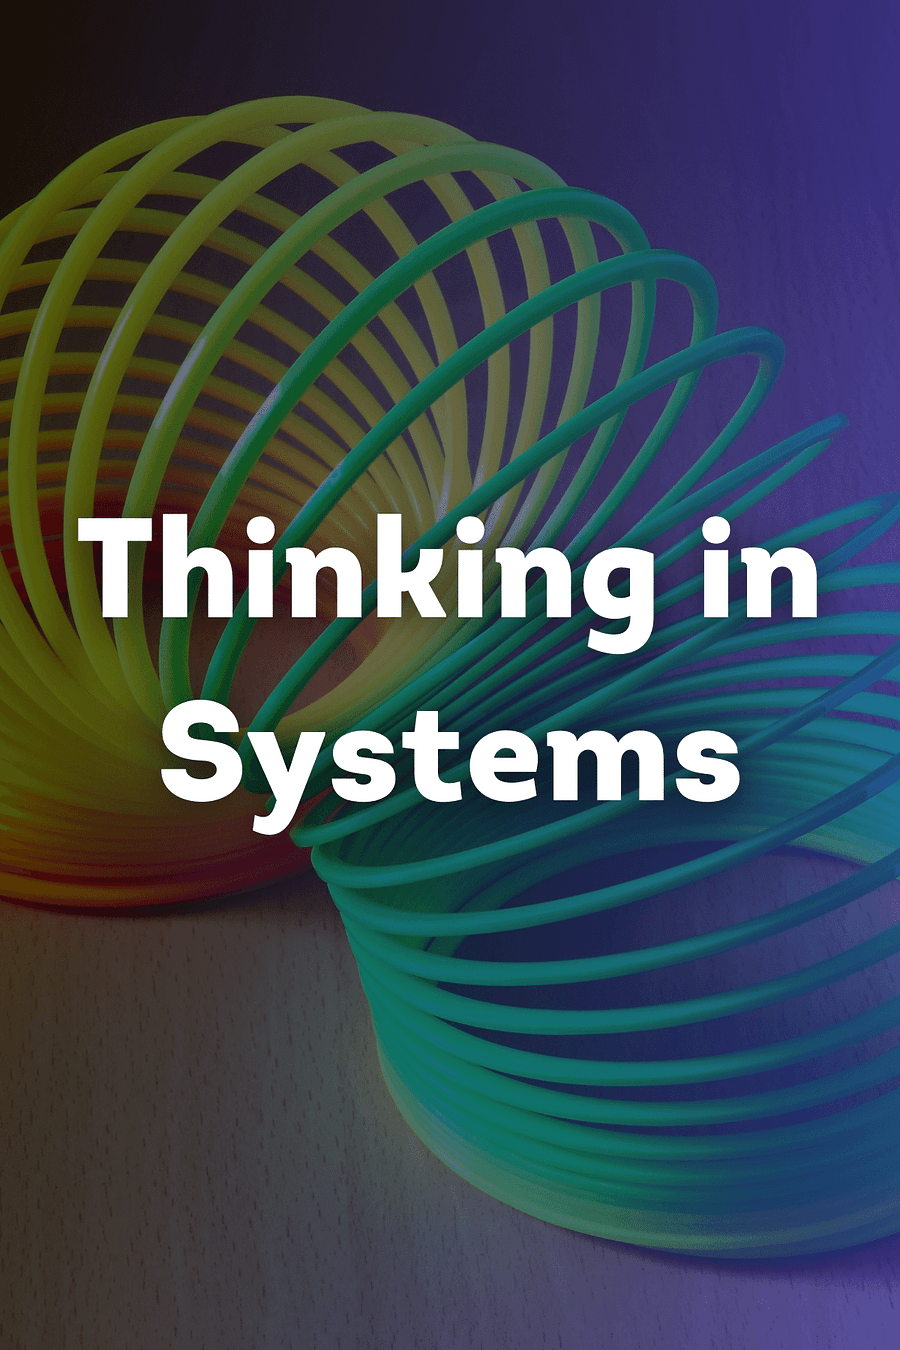 Thinking in Systems by Donella H. Meadows - Book Summary